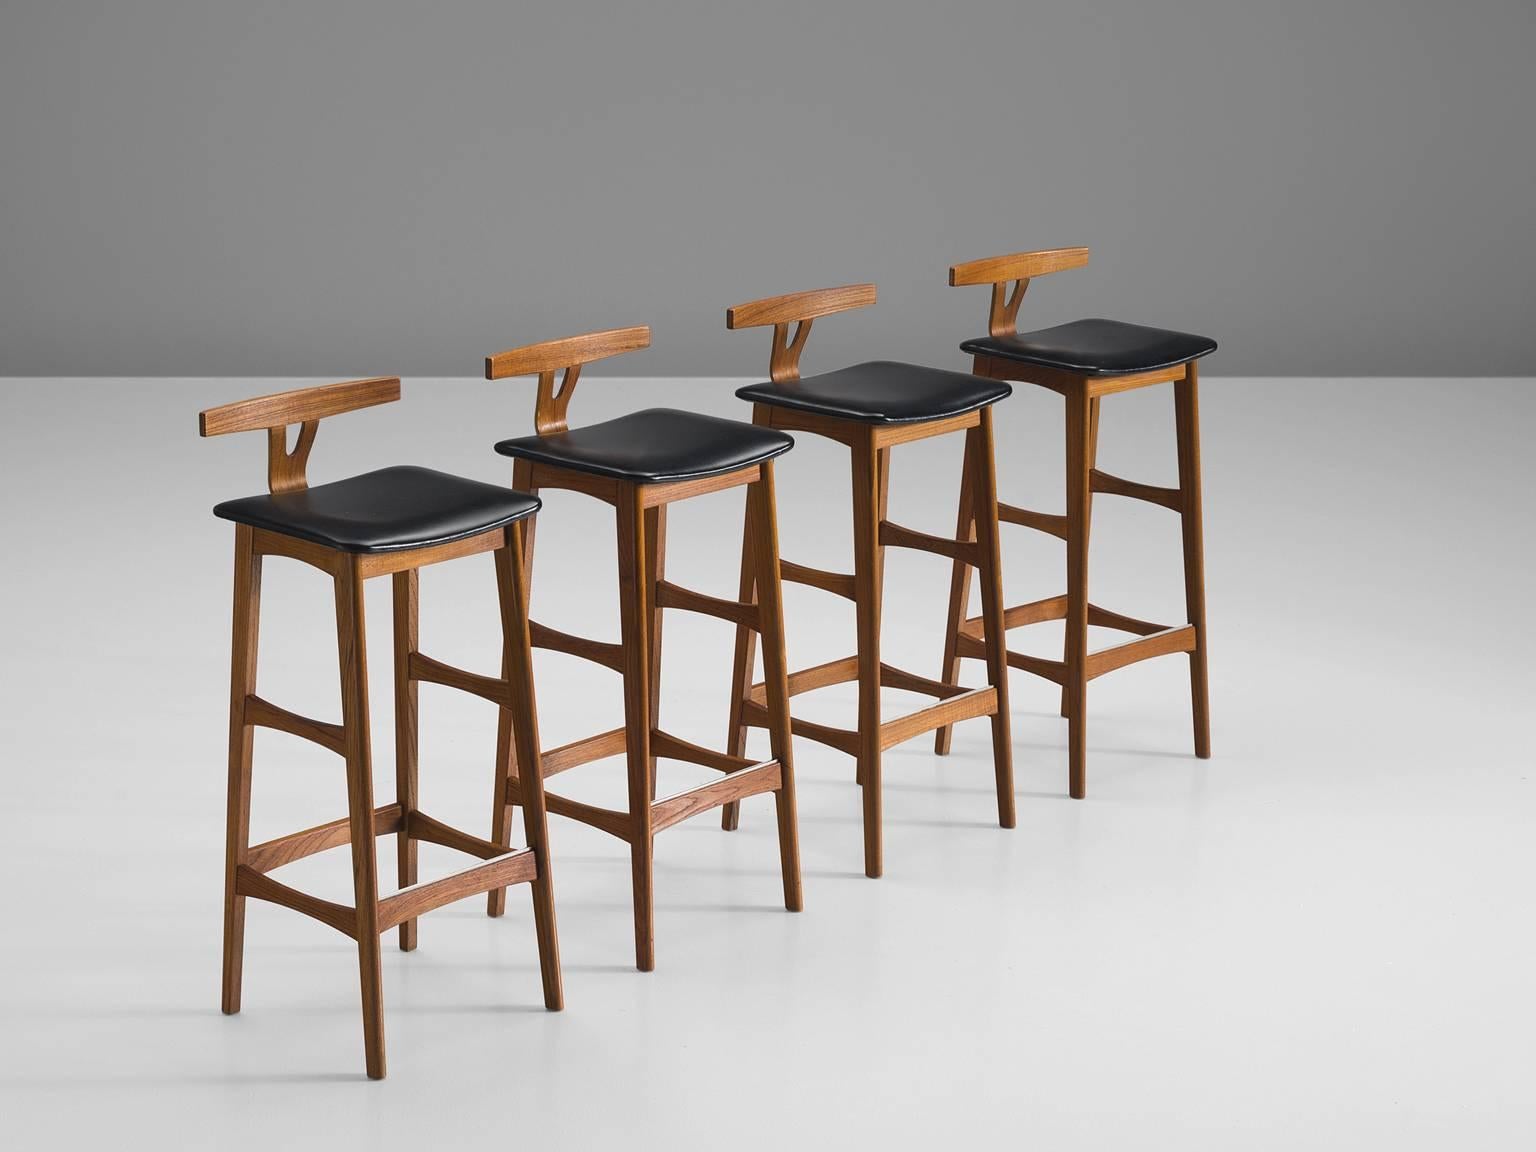 Four bar stools, teak and black leather designed by Knud Bent for Dyrlund, Denmark, 1950s 

This unusual set by Knud Bent features a solid teak frame with leather seat. The most distinct feature of this unique design is the low T-shaped backrest